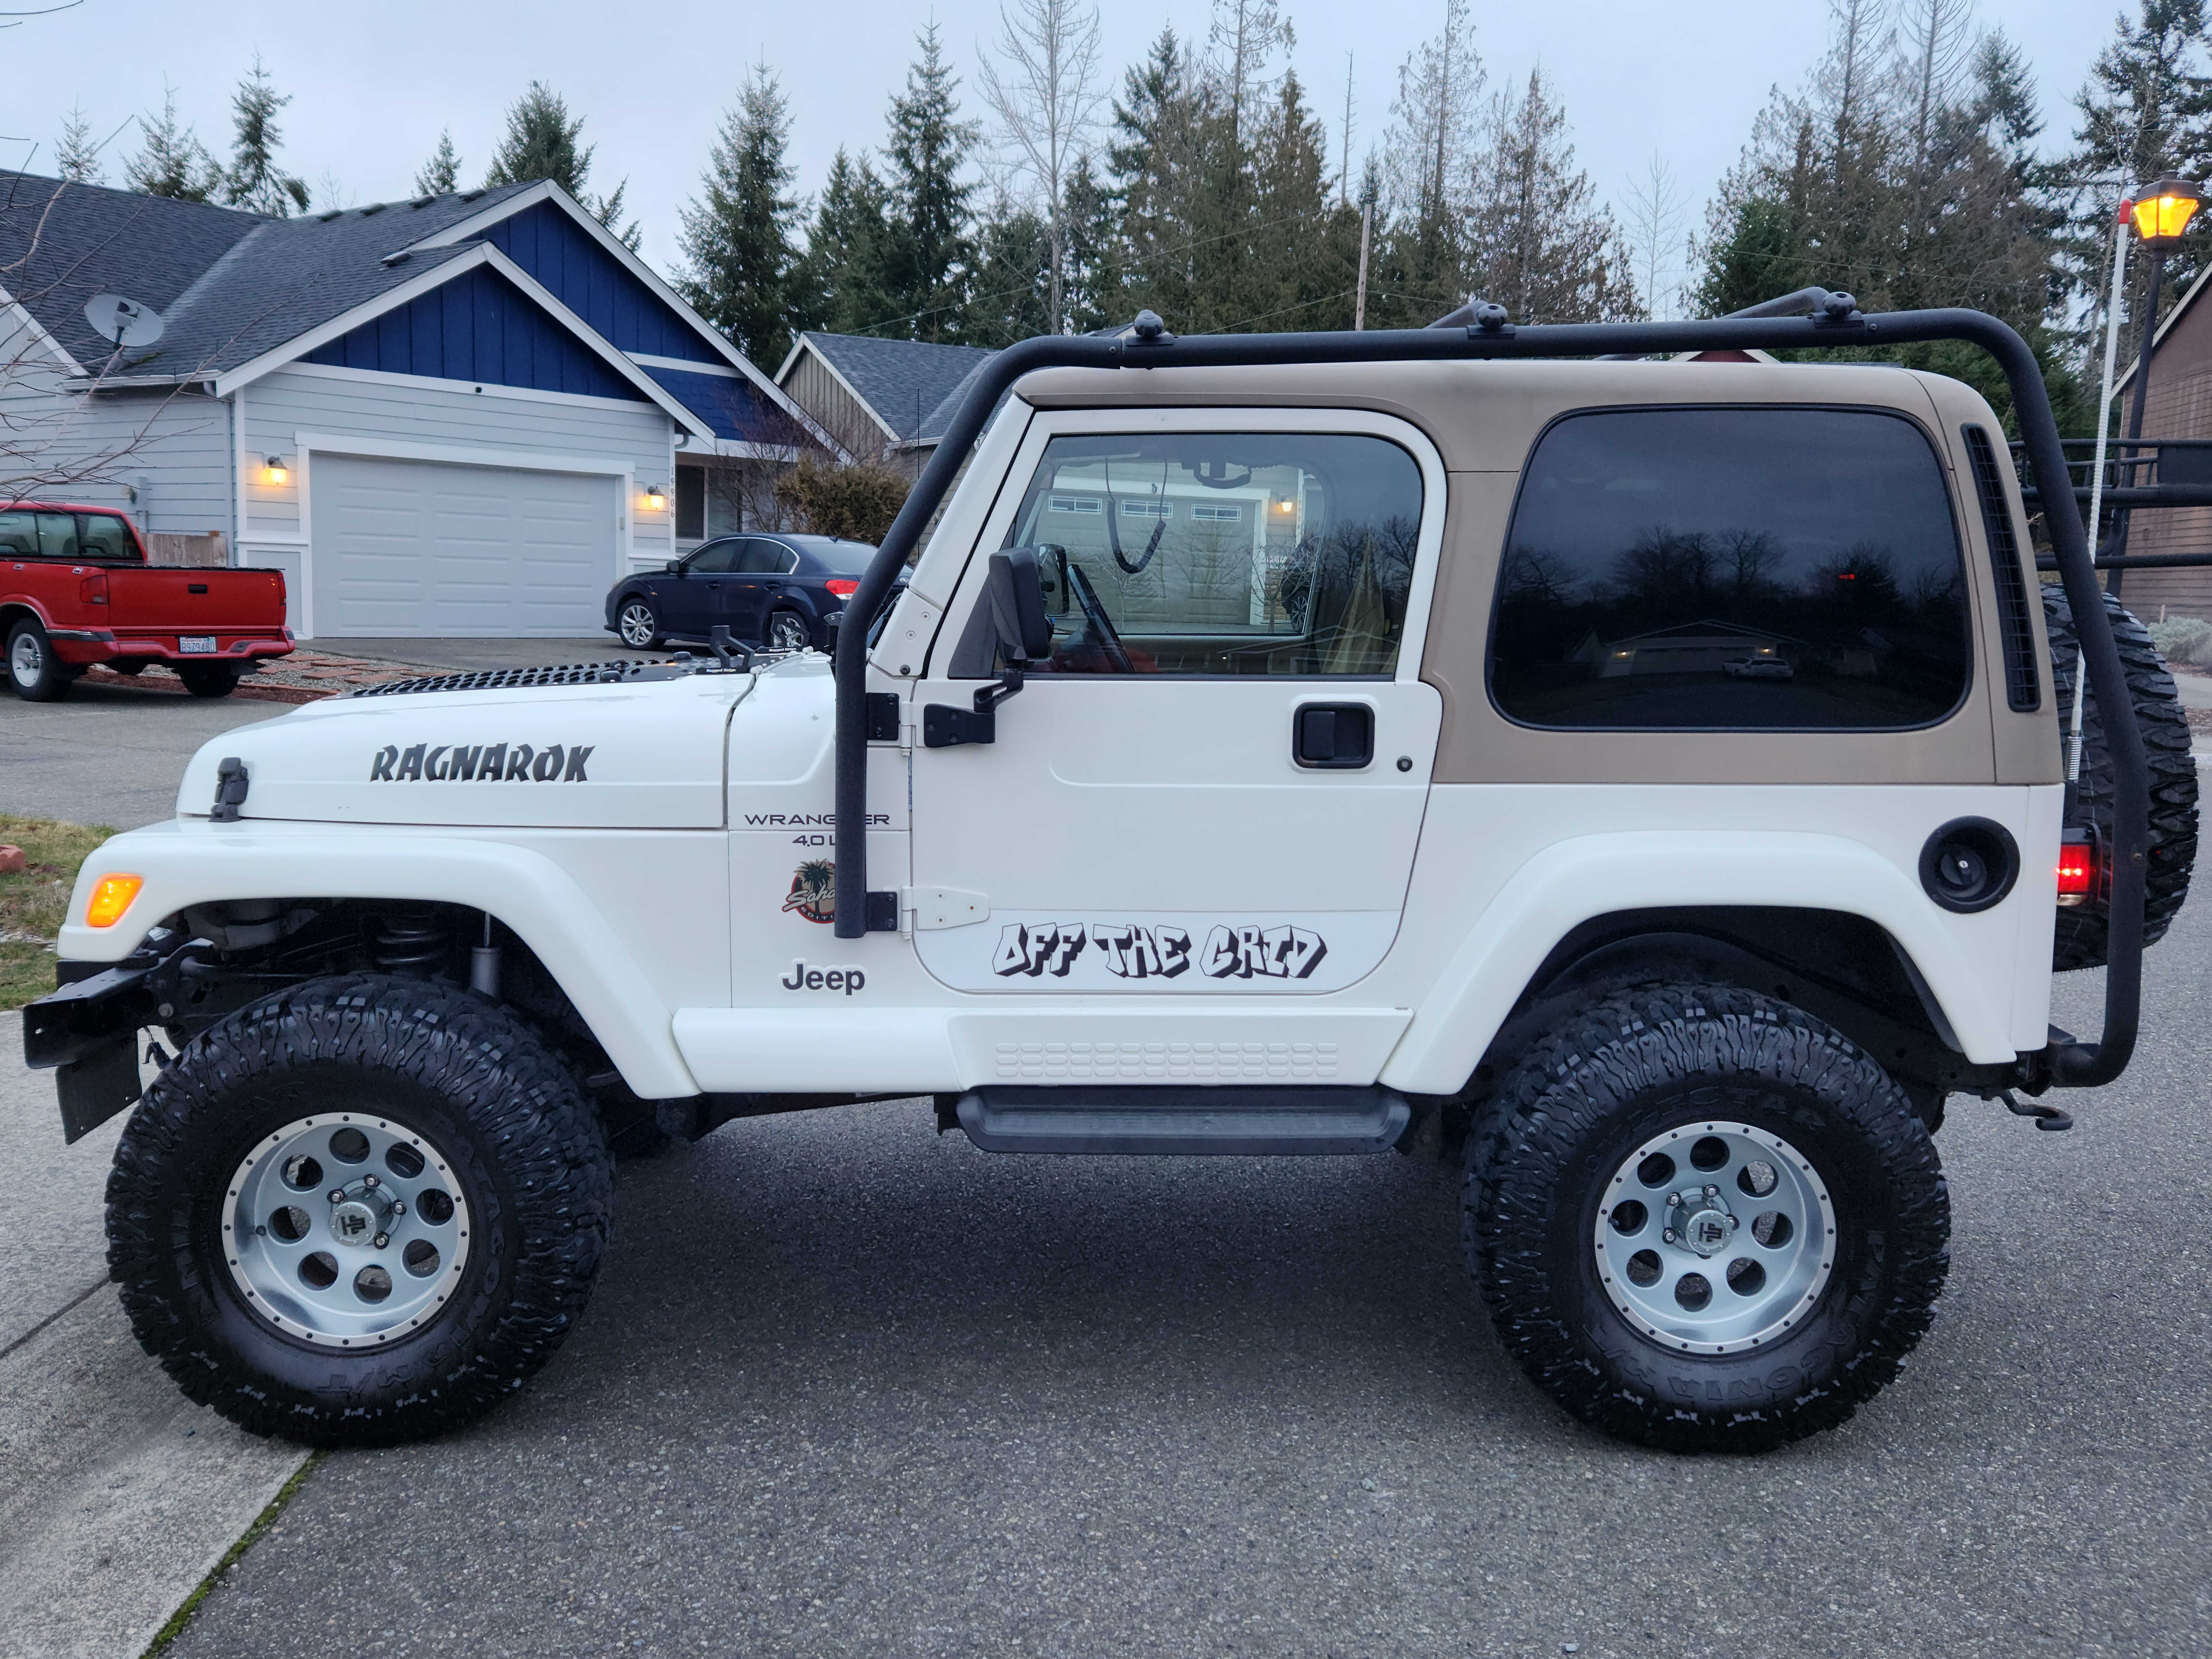 2000 Jeep Wrangler for Sale in Auburn, WA (Test Drive at Home) - Kelley Blue  Book